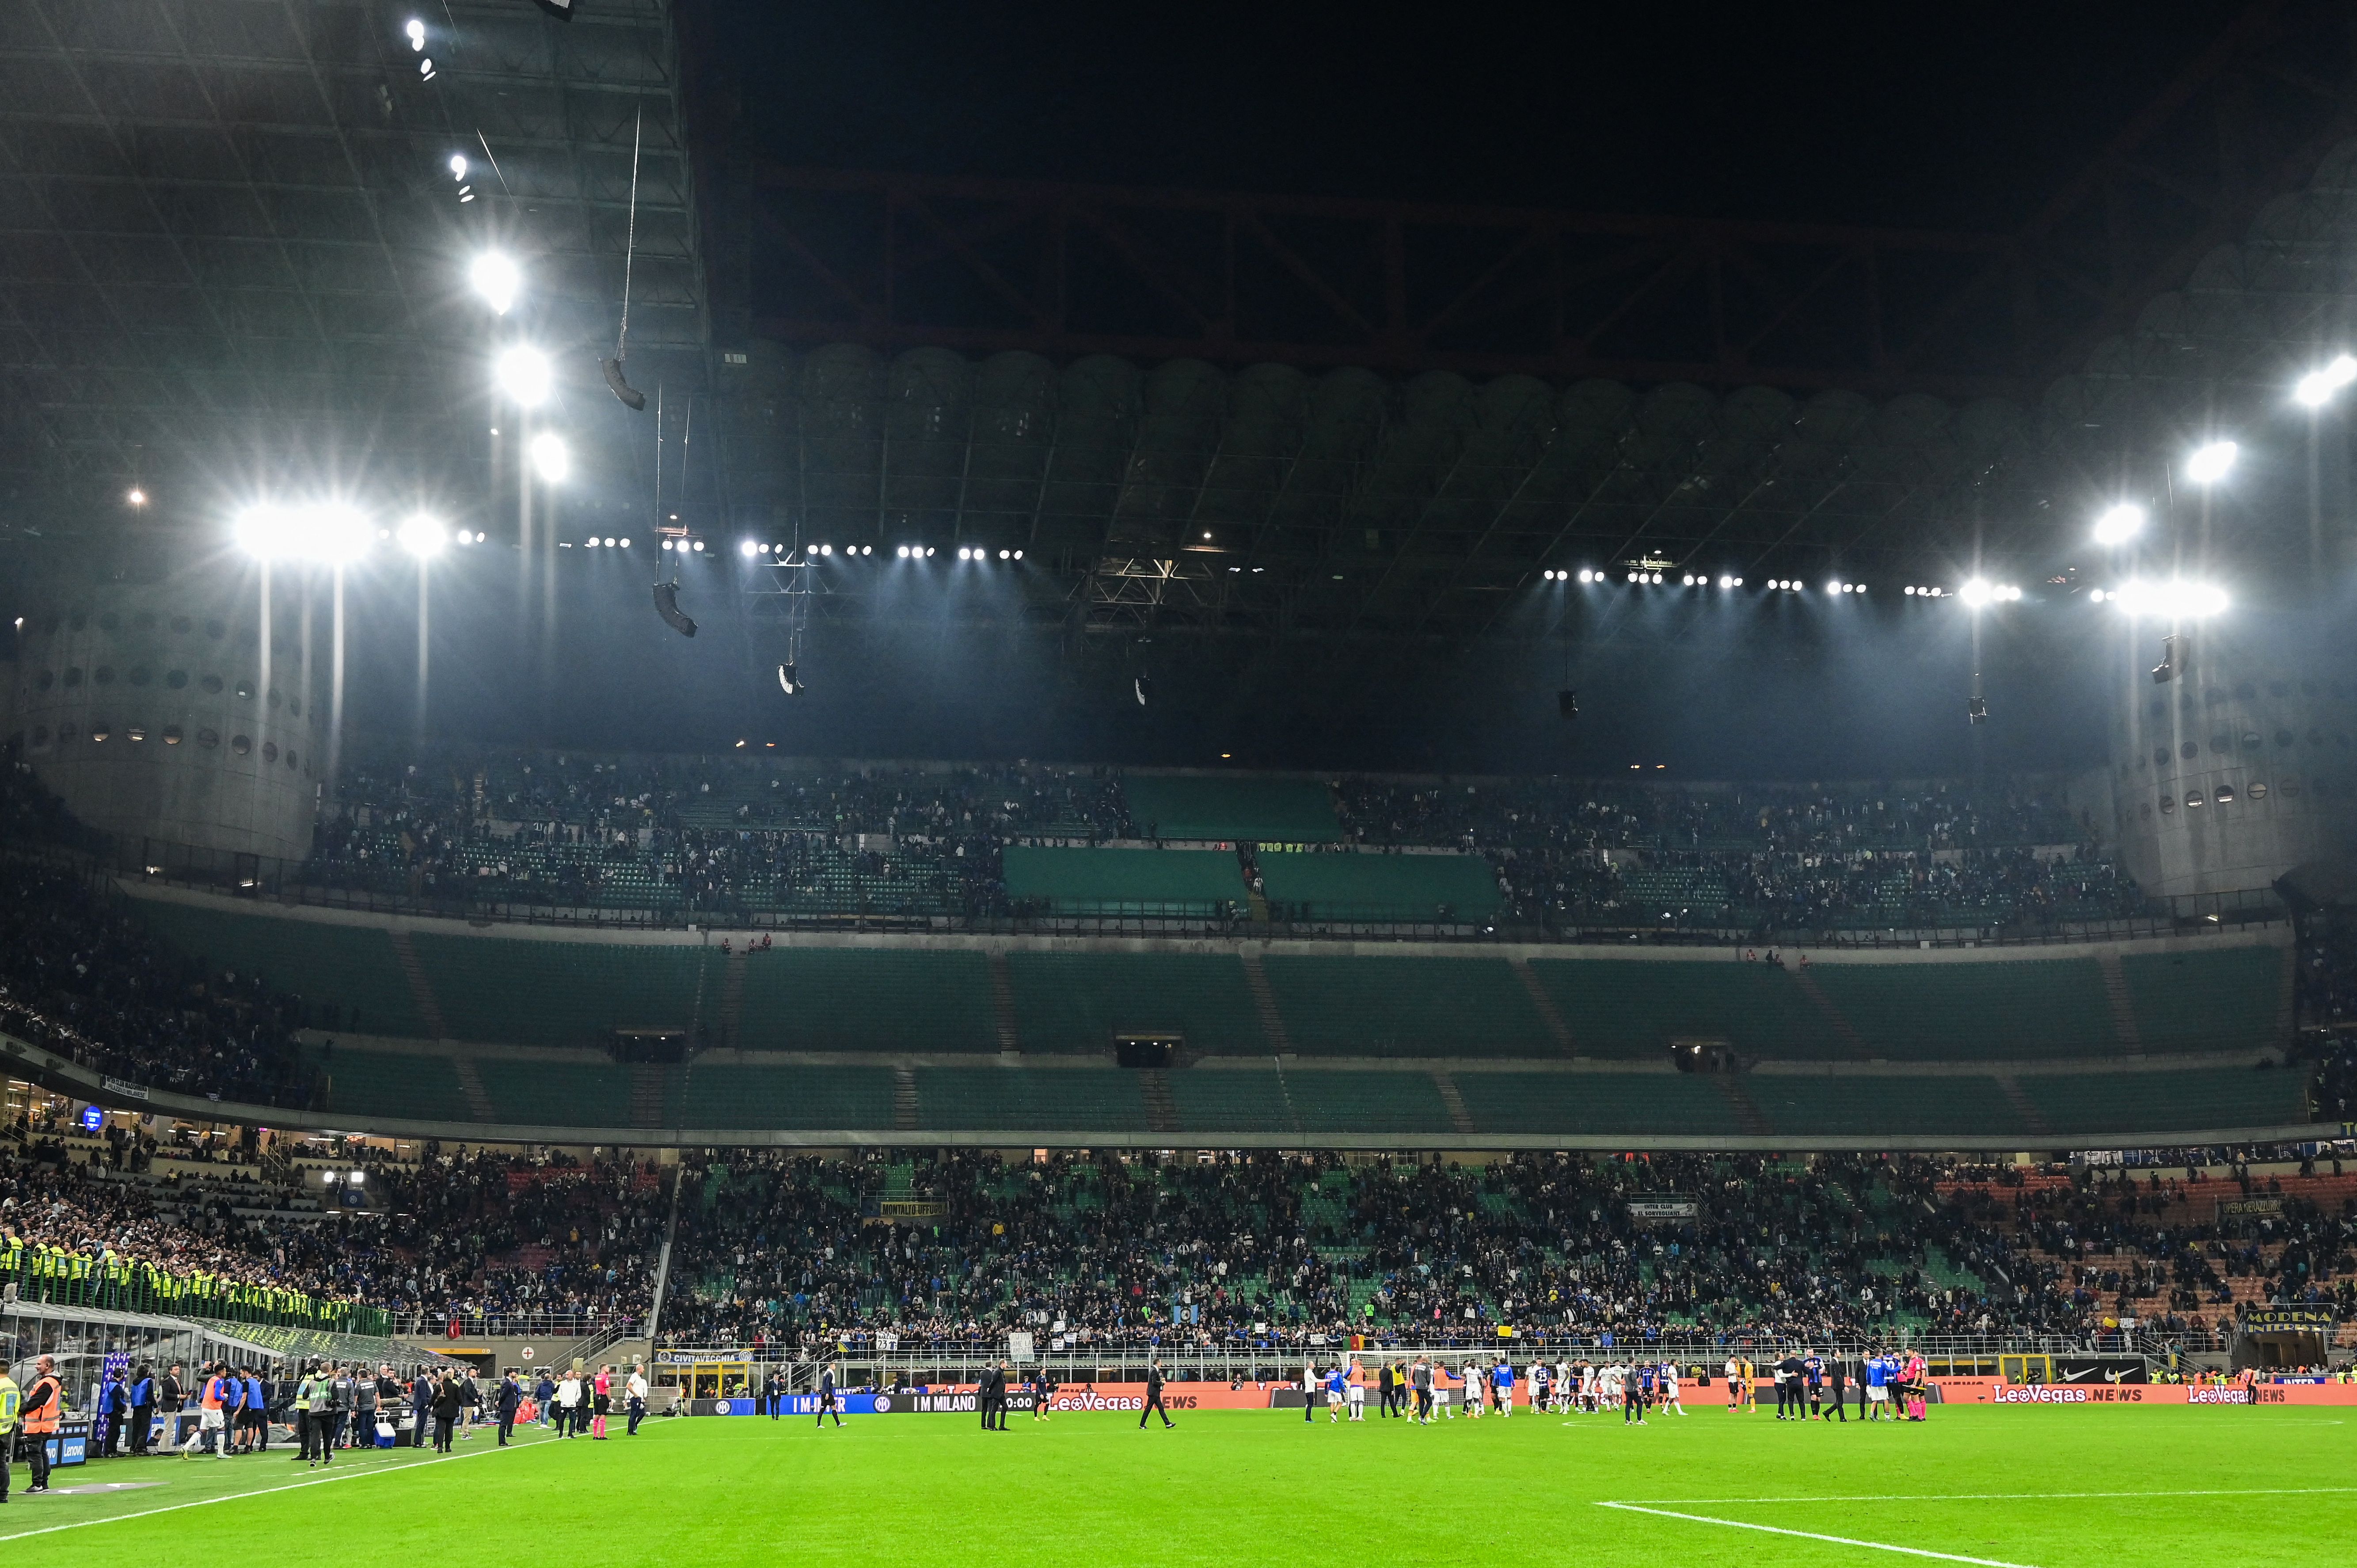 Inter's Curva Nord controversy: what really happened? - Get